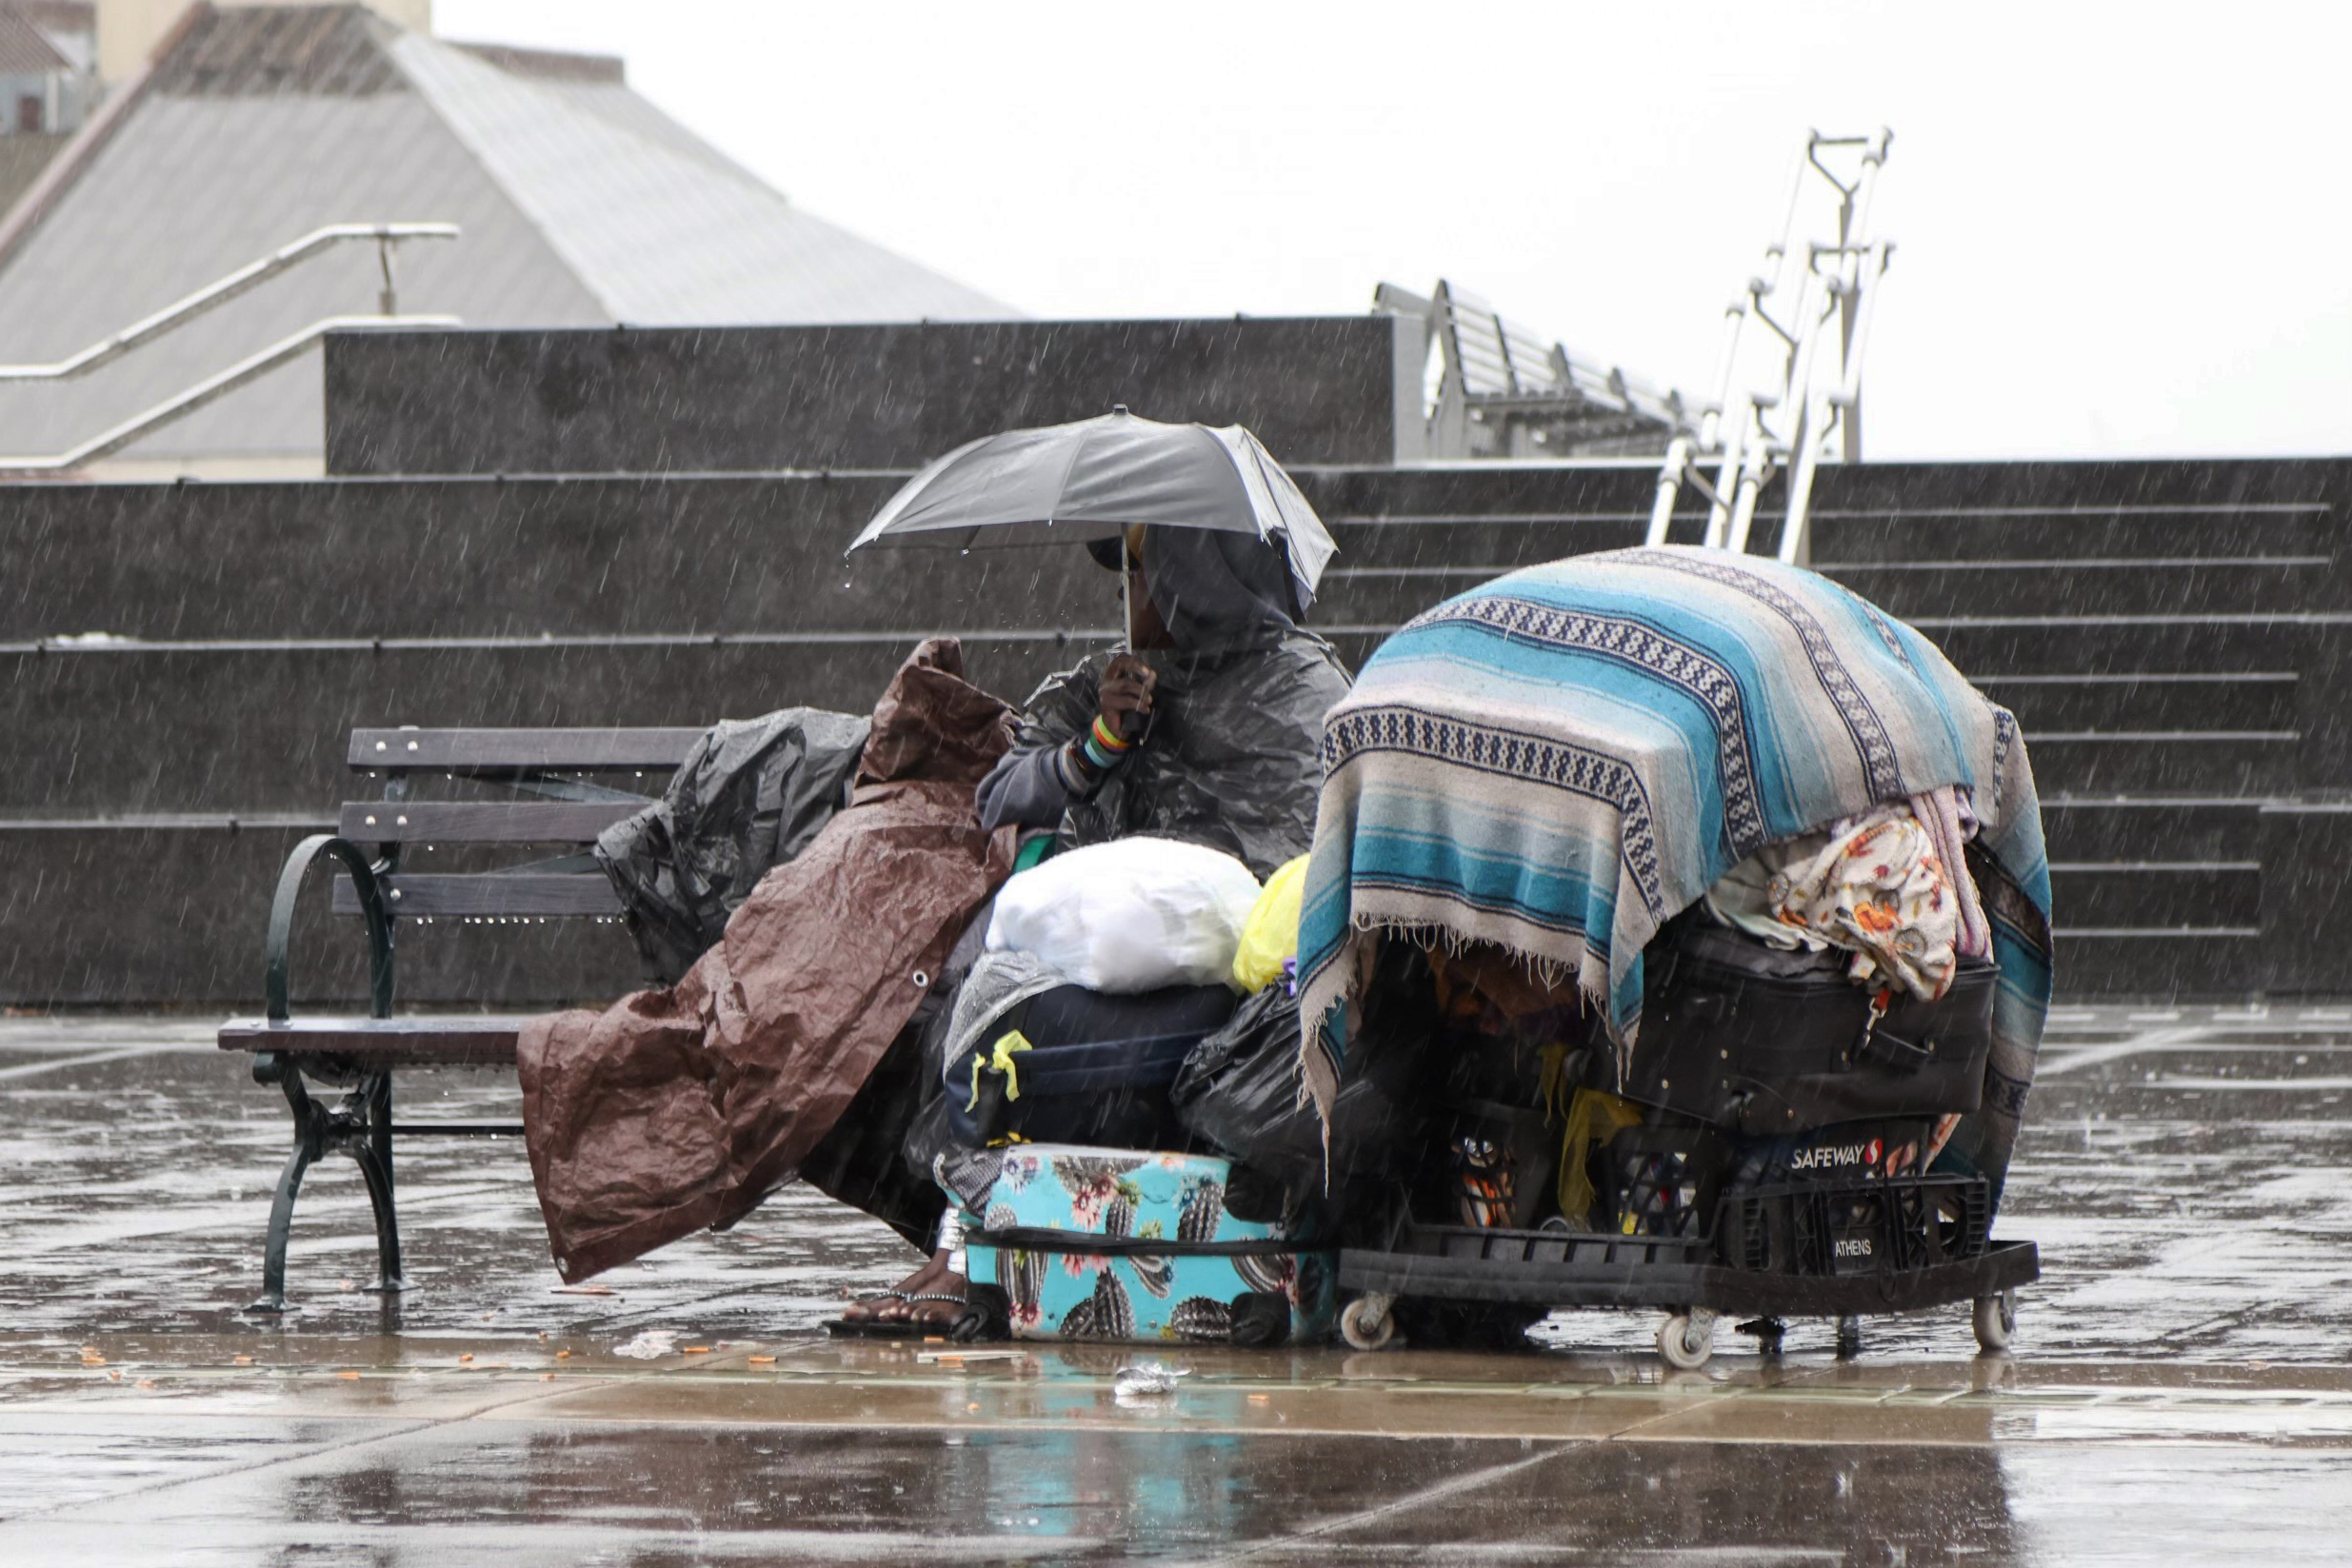 A person under an umbrella sits on a bench in the rain, surrounded by belongings covered with a tarp.